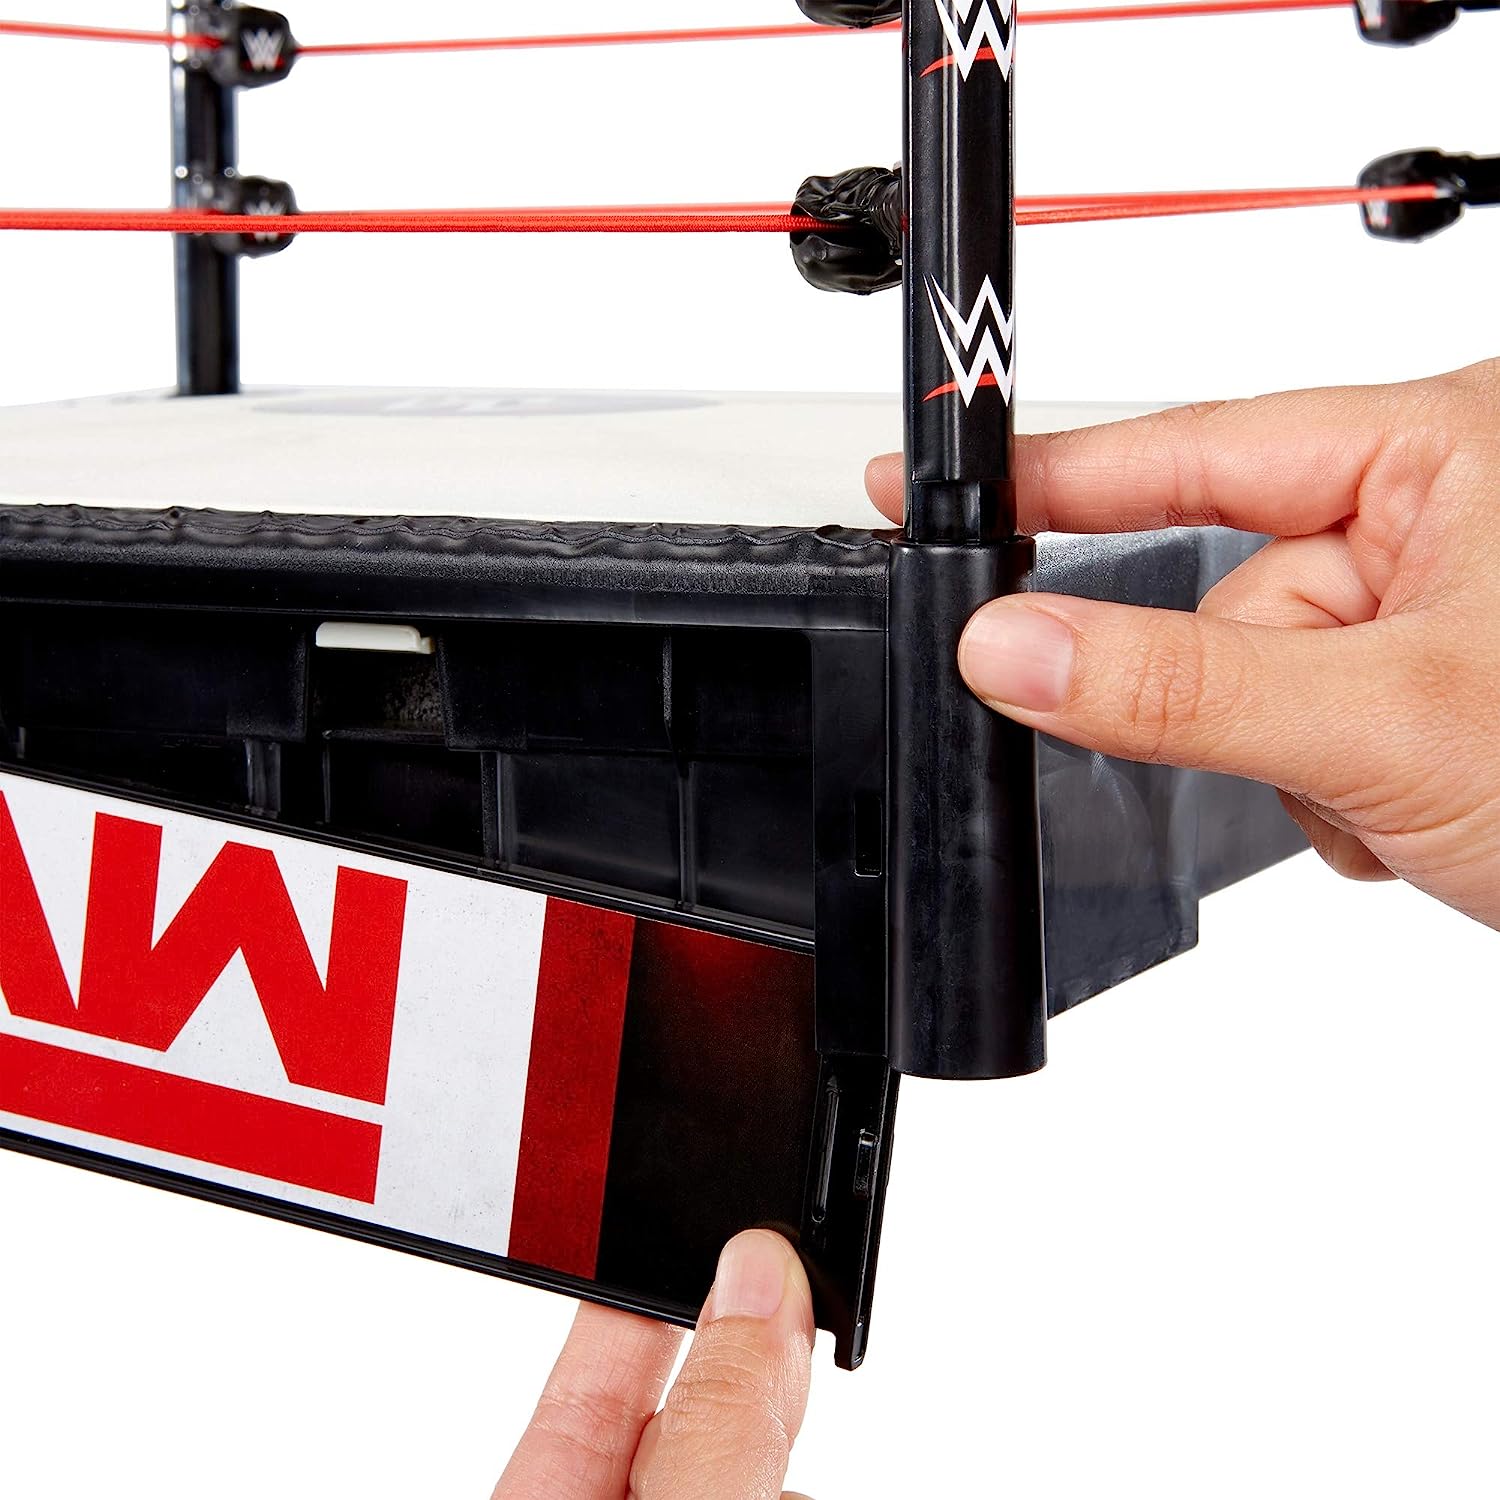 WWE フィギュア アメリカ直輸入 人形 プロレス WWE RAW/Survivor Series Superstar Ring,  14-inches Across with Ring Ropes, Swappable Ring Skirts for 2-in-1 Ring  FunWWE フィギュア アメリカ直輸入 人形 プロレス angelica